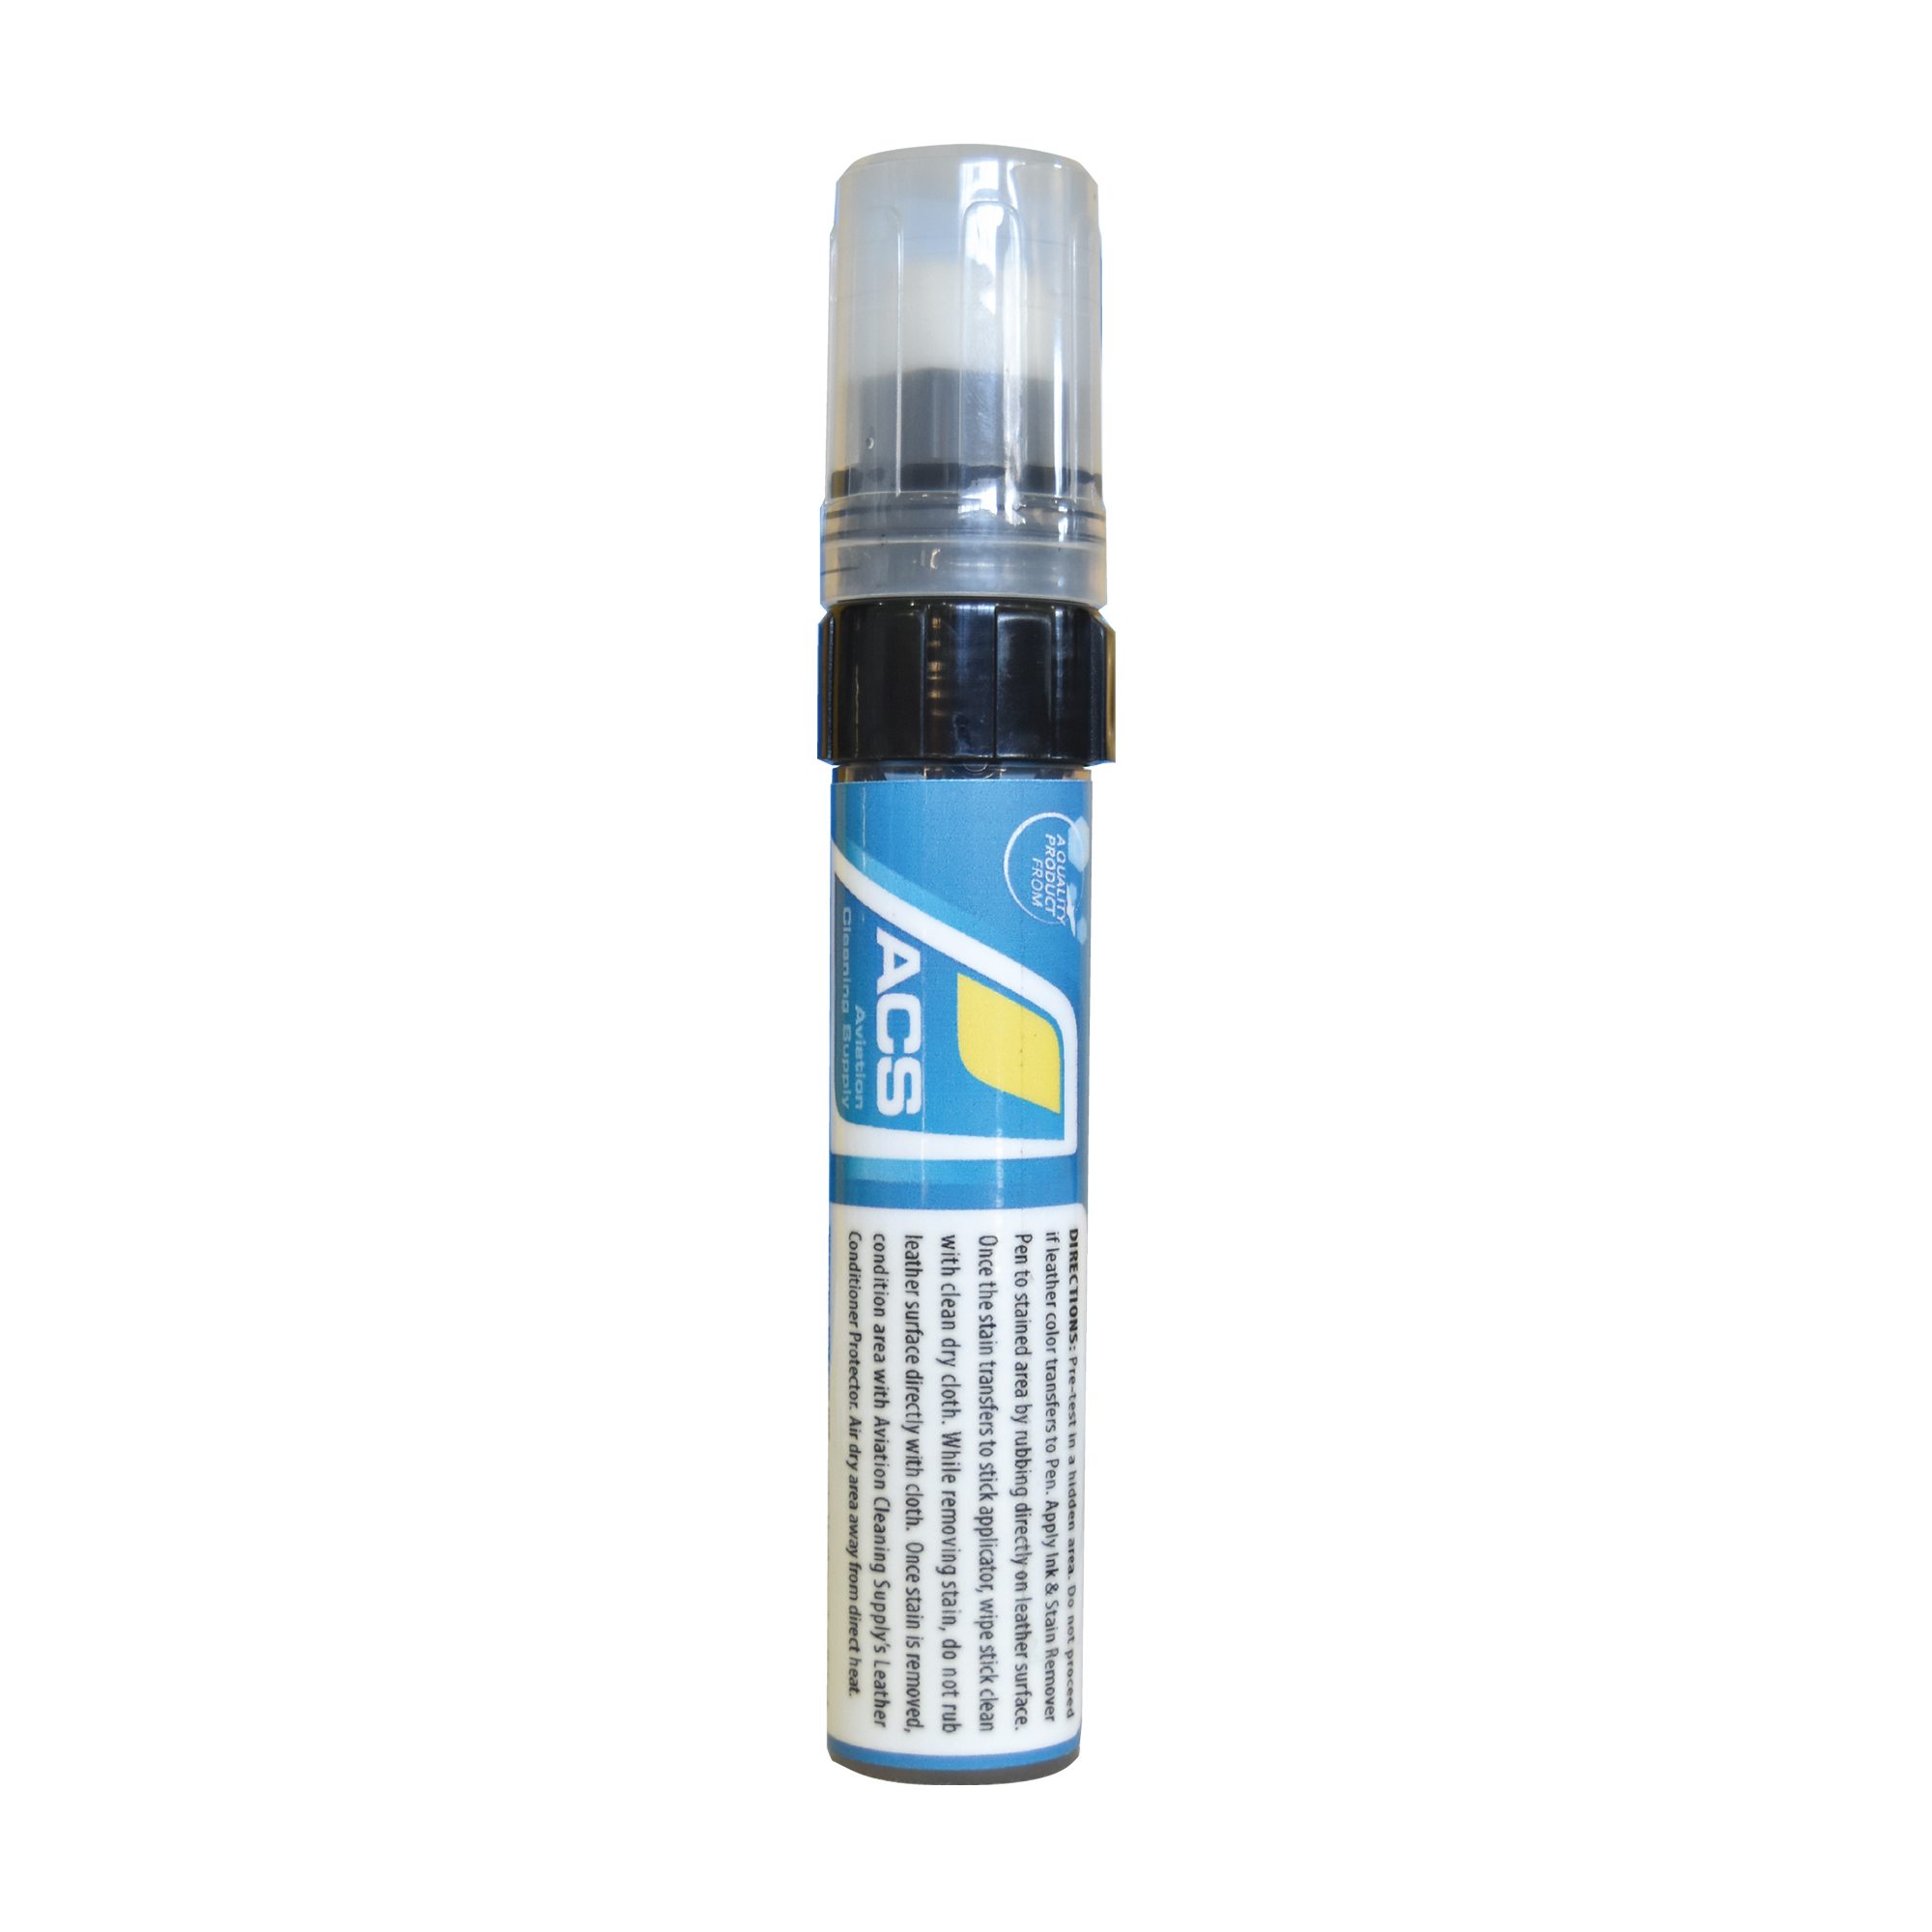 IR-163 Ink Remover Pen - Aviation Cleaning Supply